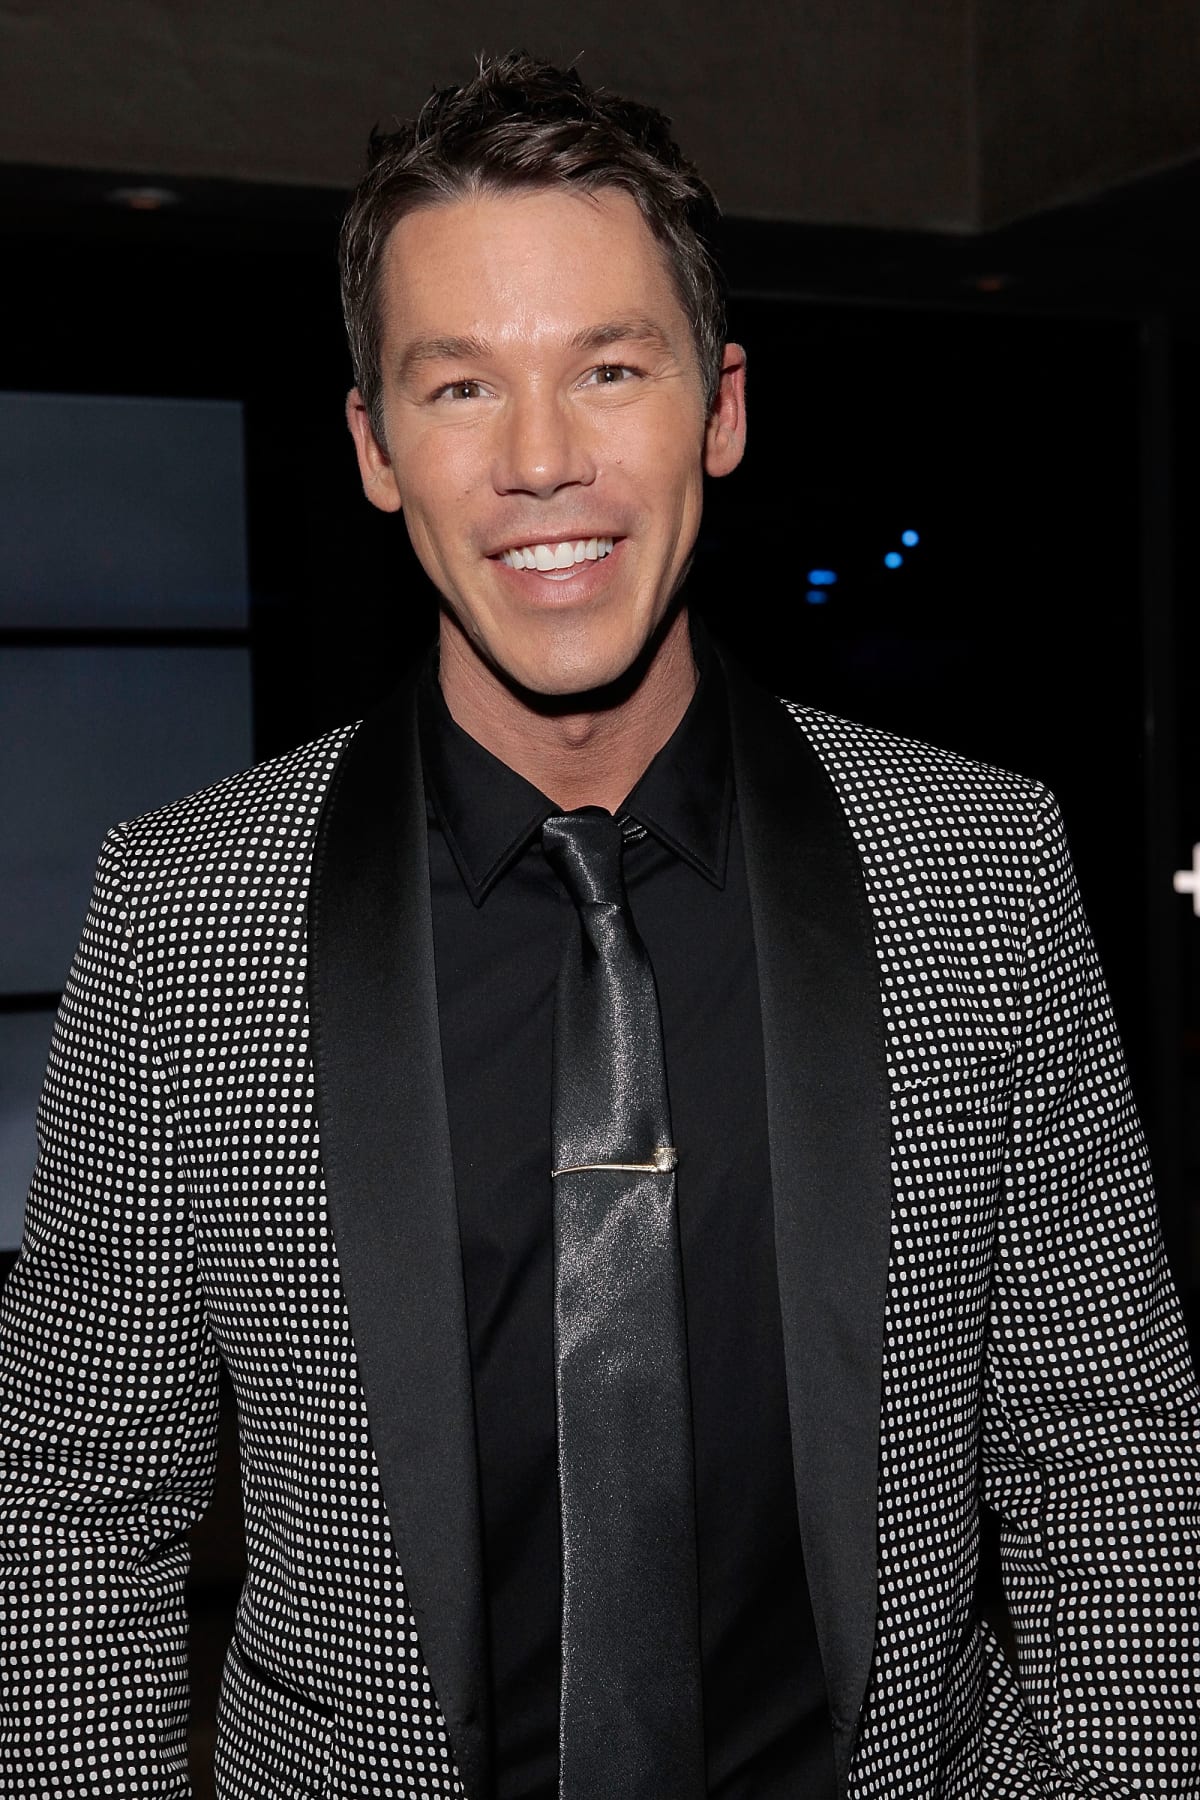 LOS ANGELES, CA - FEBRUARY 10:  David Bromstad attends Los Angeles Confidential Magazine and Mary J. Blige celebrate the GRAMMYS at Elevate Lounge with Ciroc Premium Ultra Vodka on February 10, 2013 in Los Angeles, California.  (Photo by Mike Windle/WireImage)